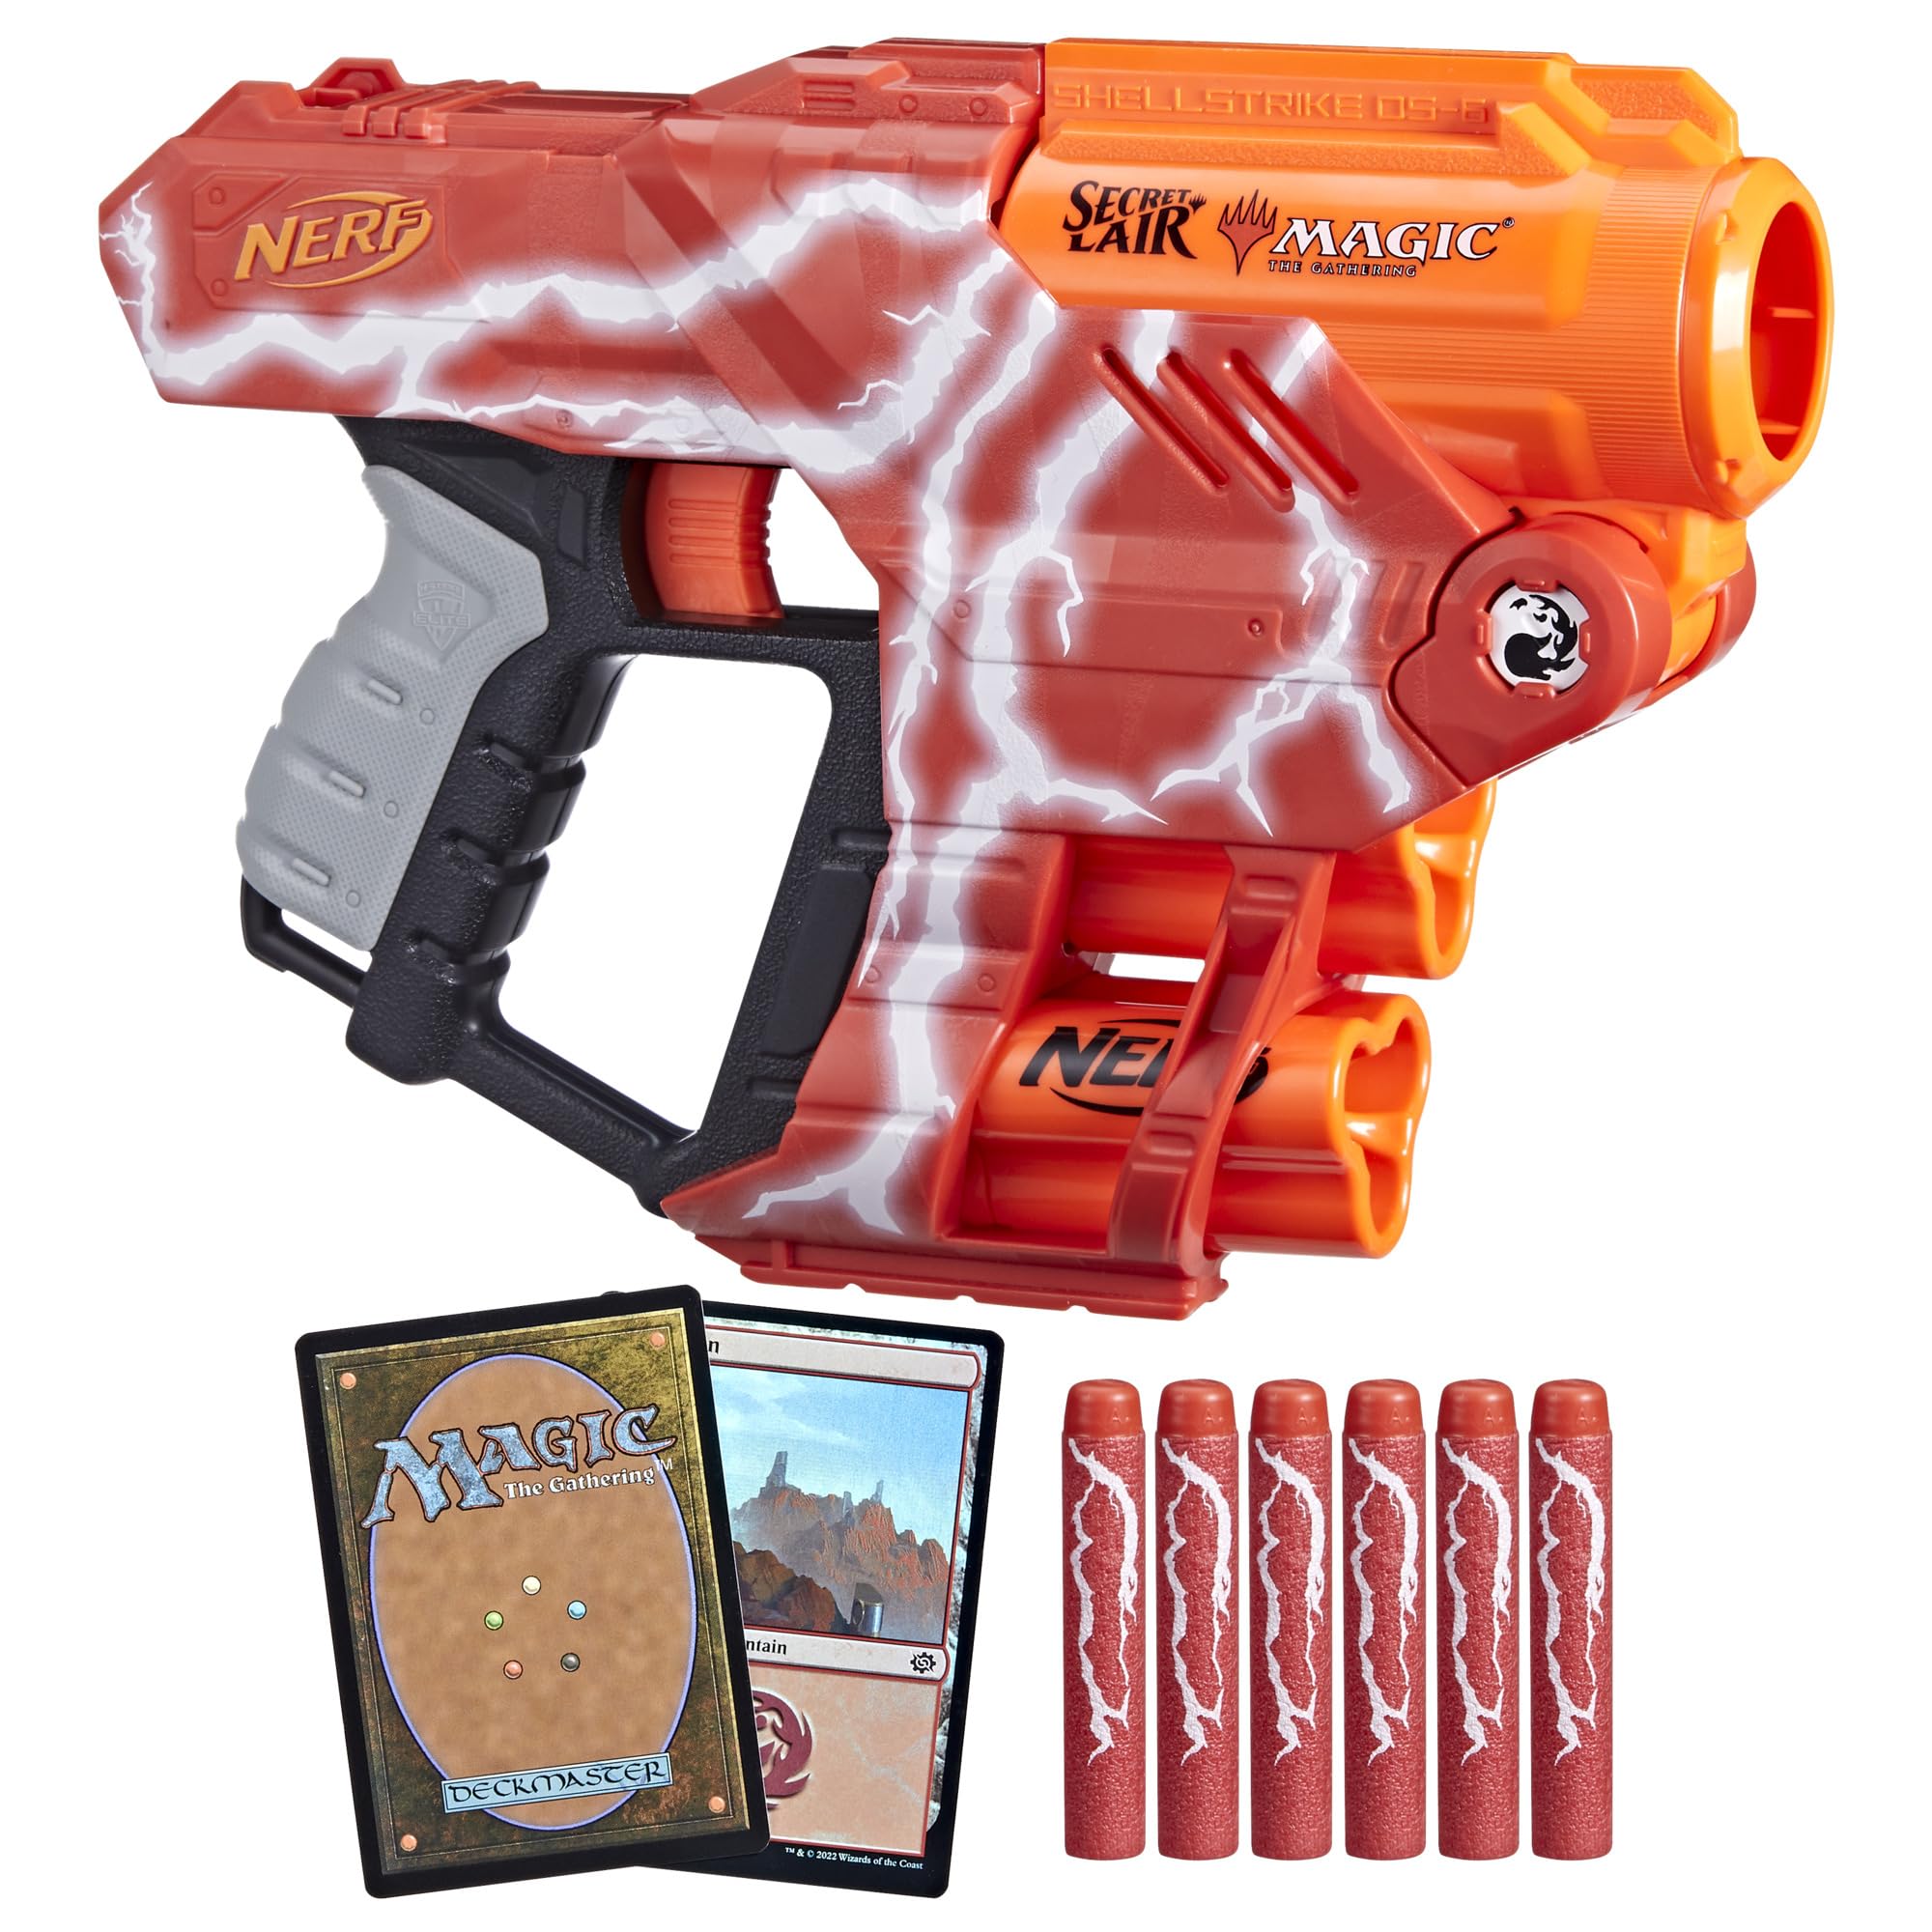 NERF LMTD Lightning Lair, Magic: The Gathering Secret Lair Blaster with 6 Darts, 2 Shells, and 2 Promo Trading Cards